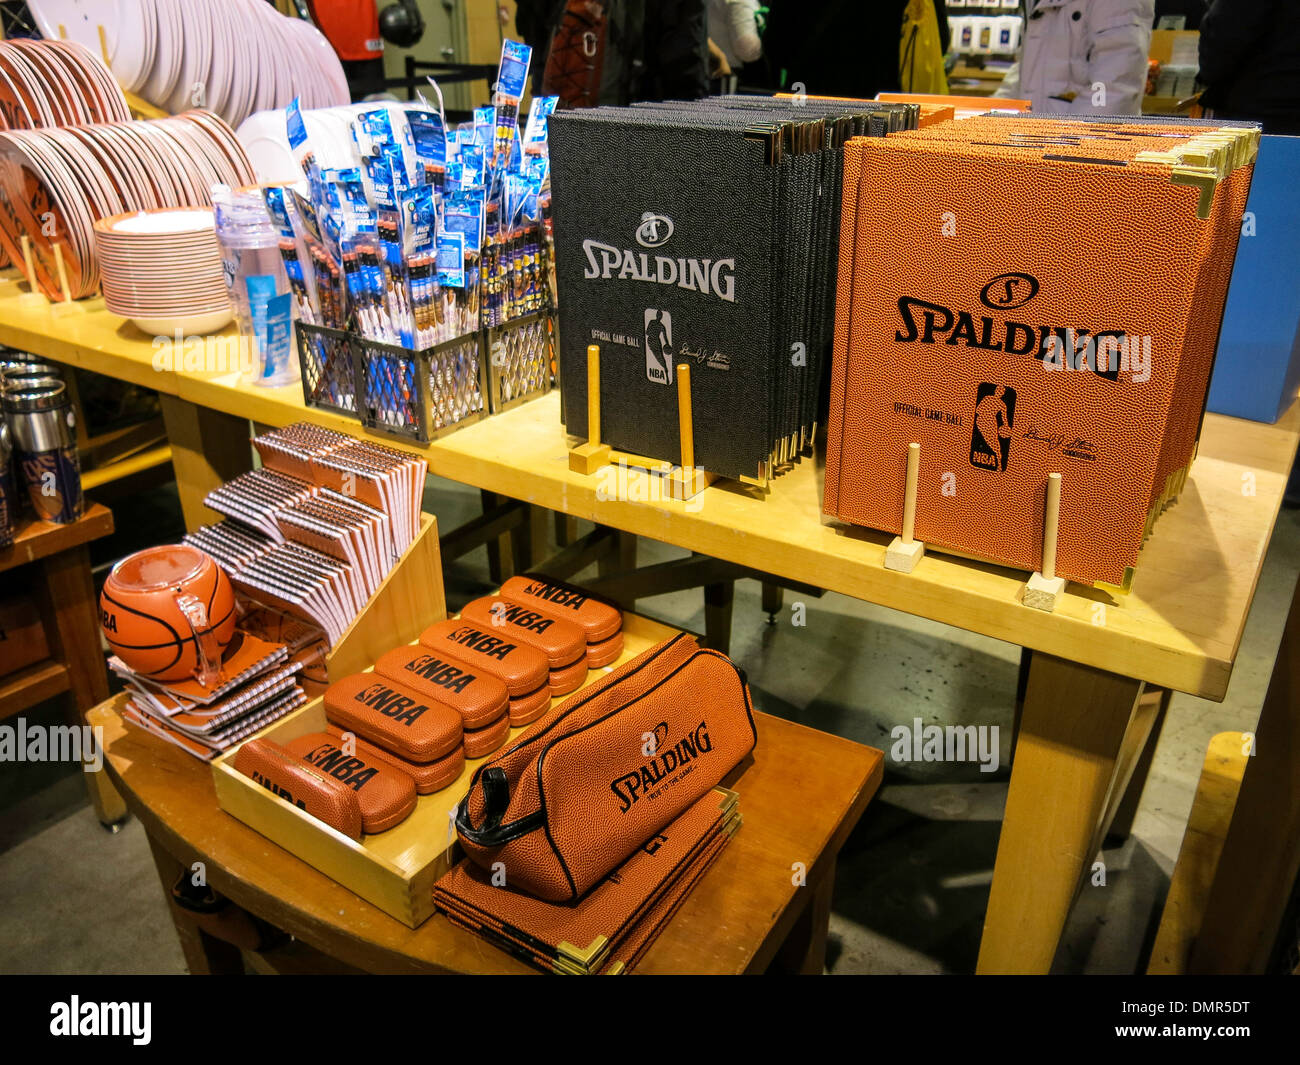 Spalding Basketball Leather Products, NBA Store Interior, Fifth Avenue, NYC 2013 Stockfoto